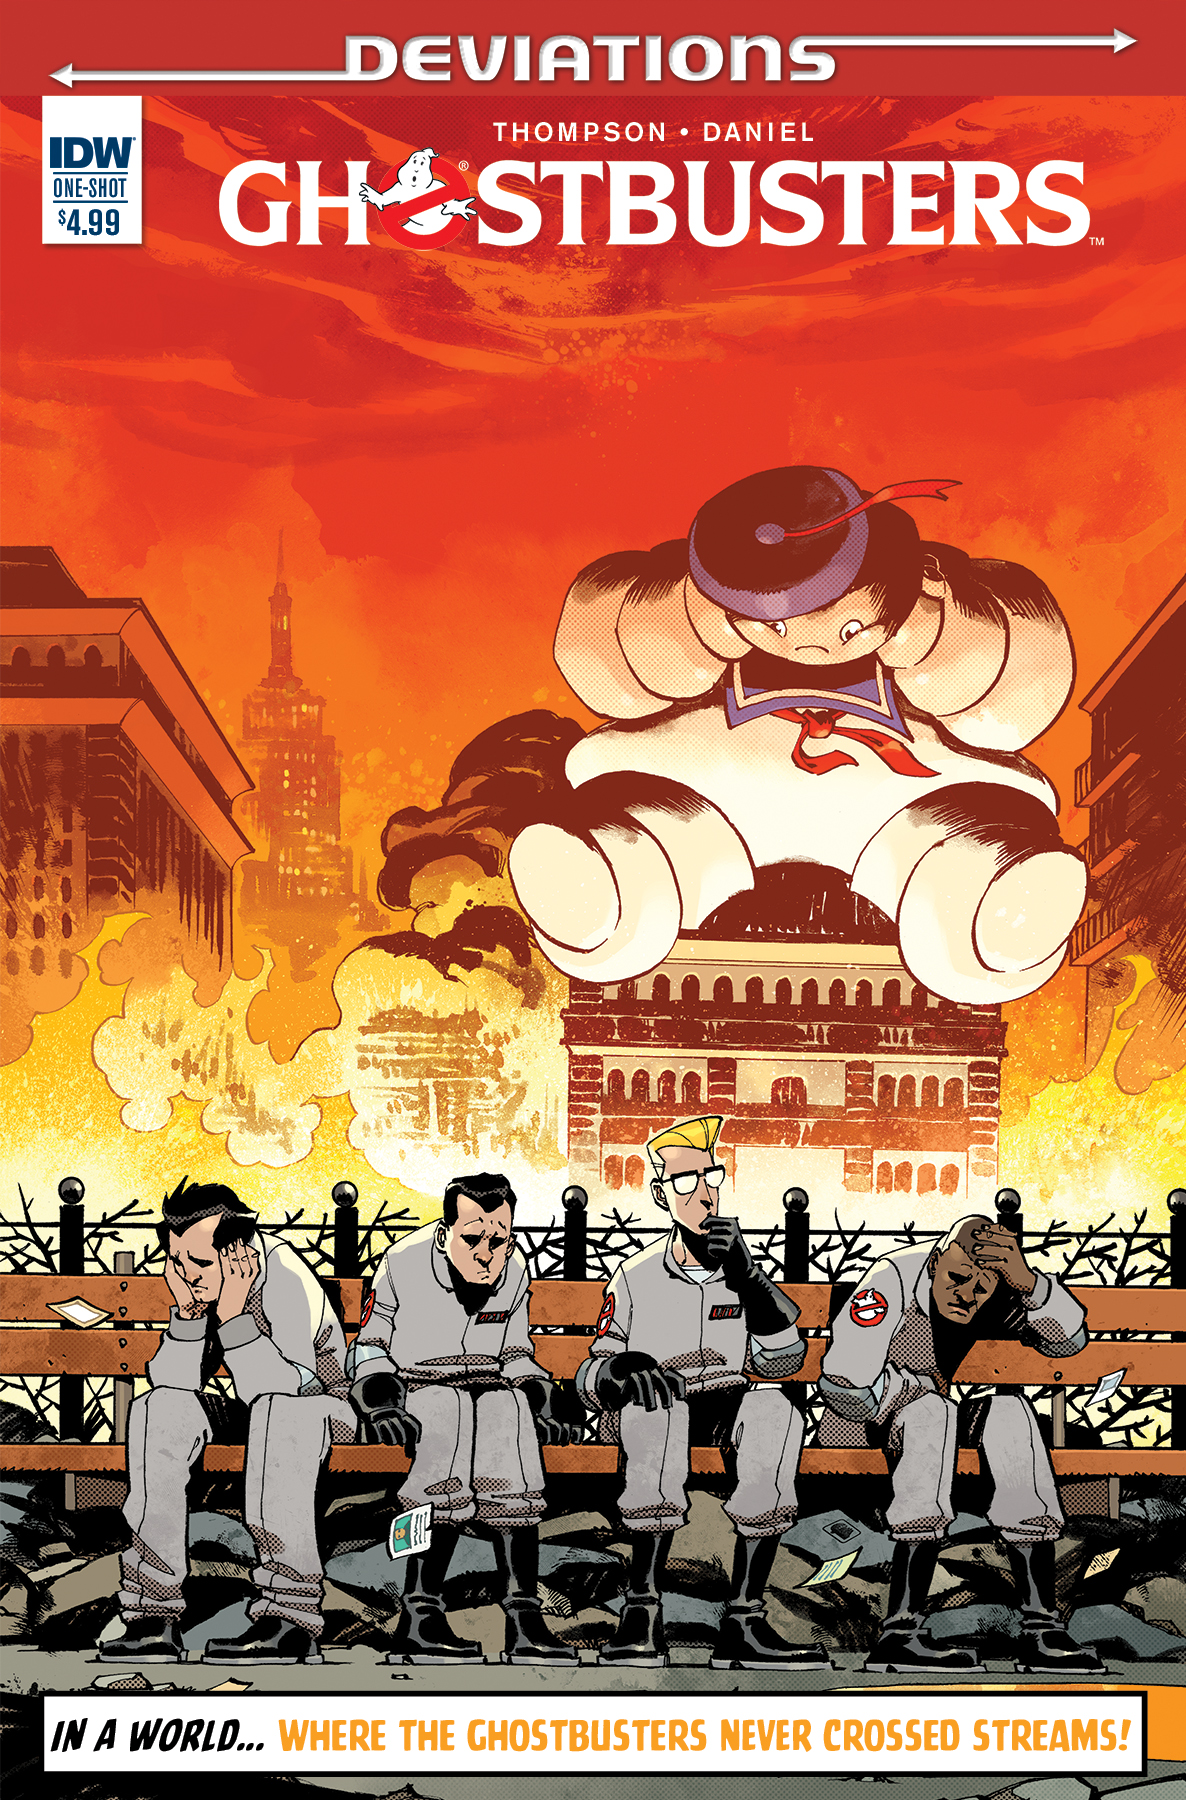 Ghostbusters Deviations One-Shot